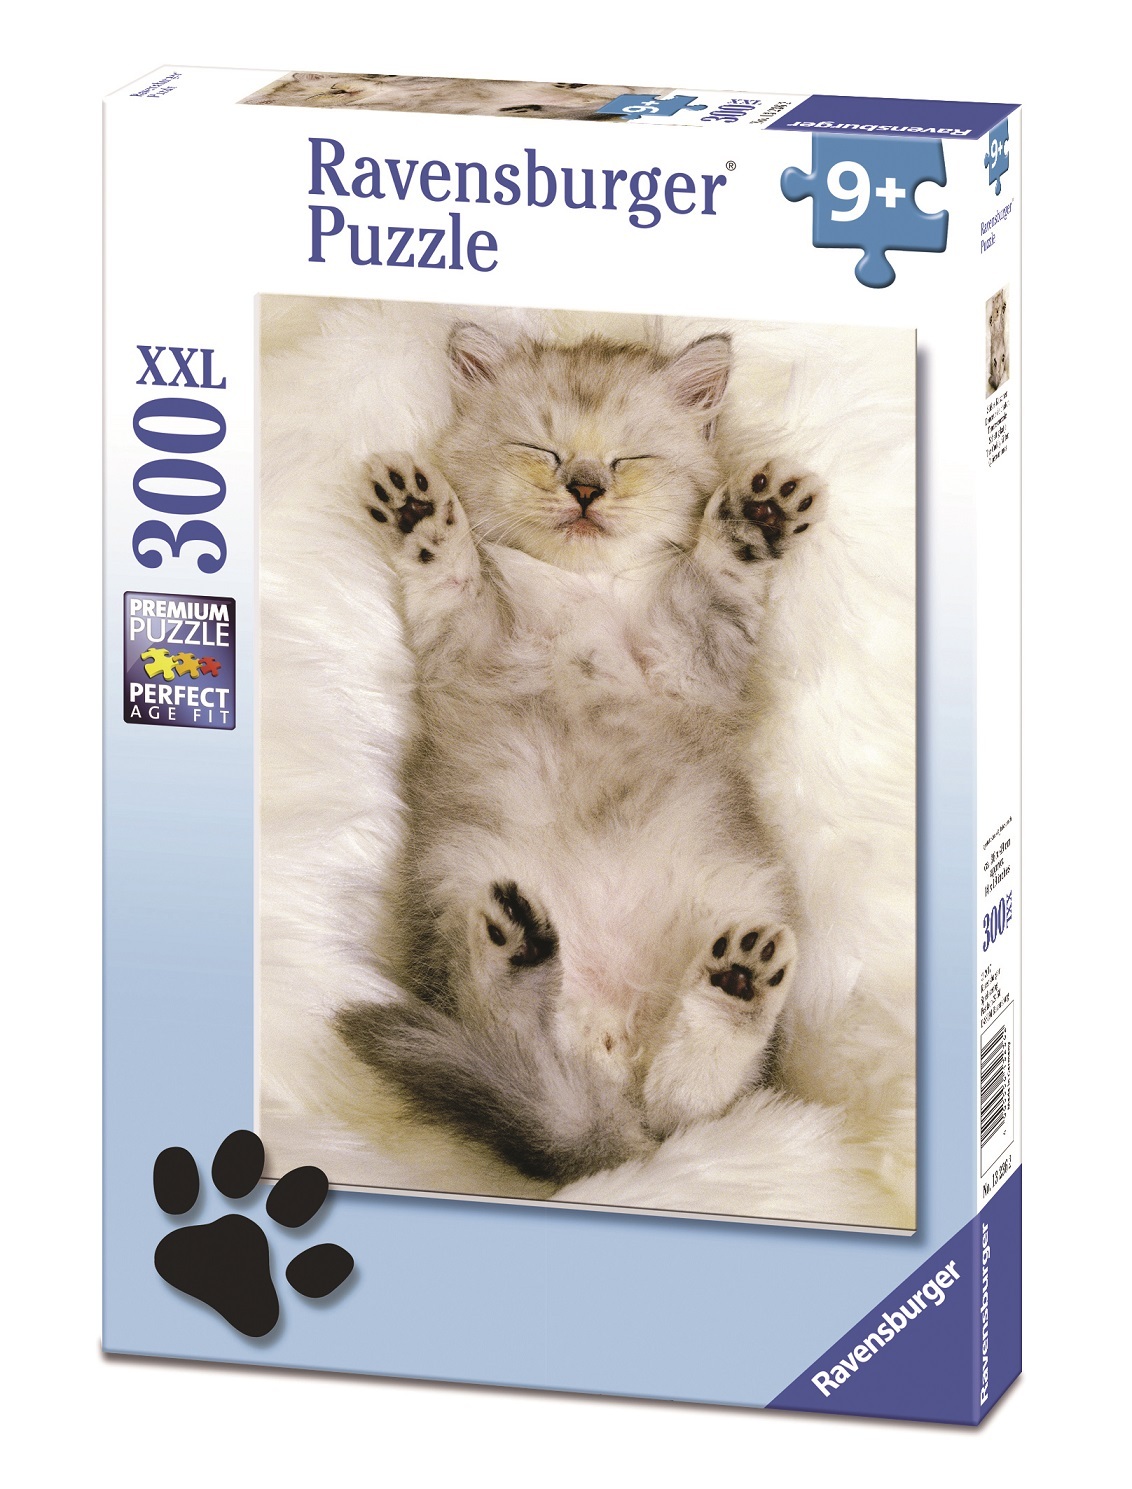 Ravensburger 300pc The Cuddly Kitten Jigsaw Puzzle 13236 2